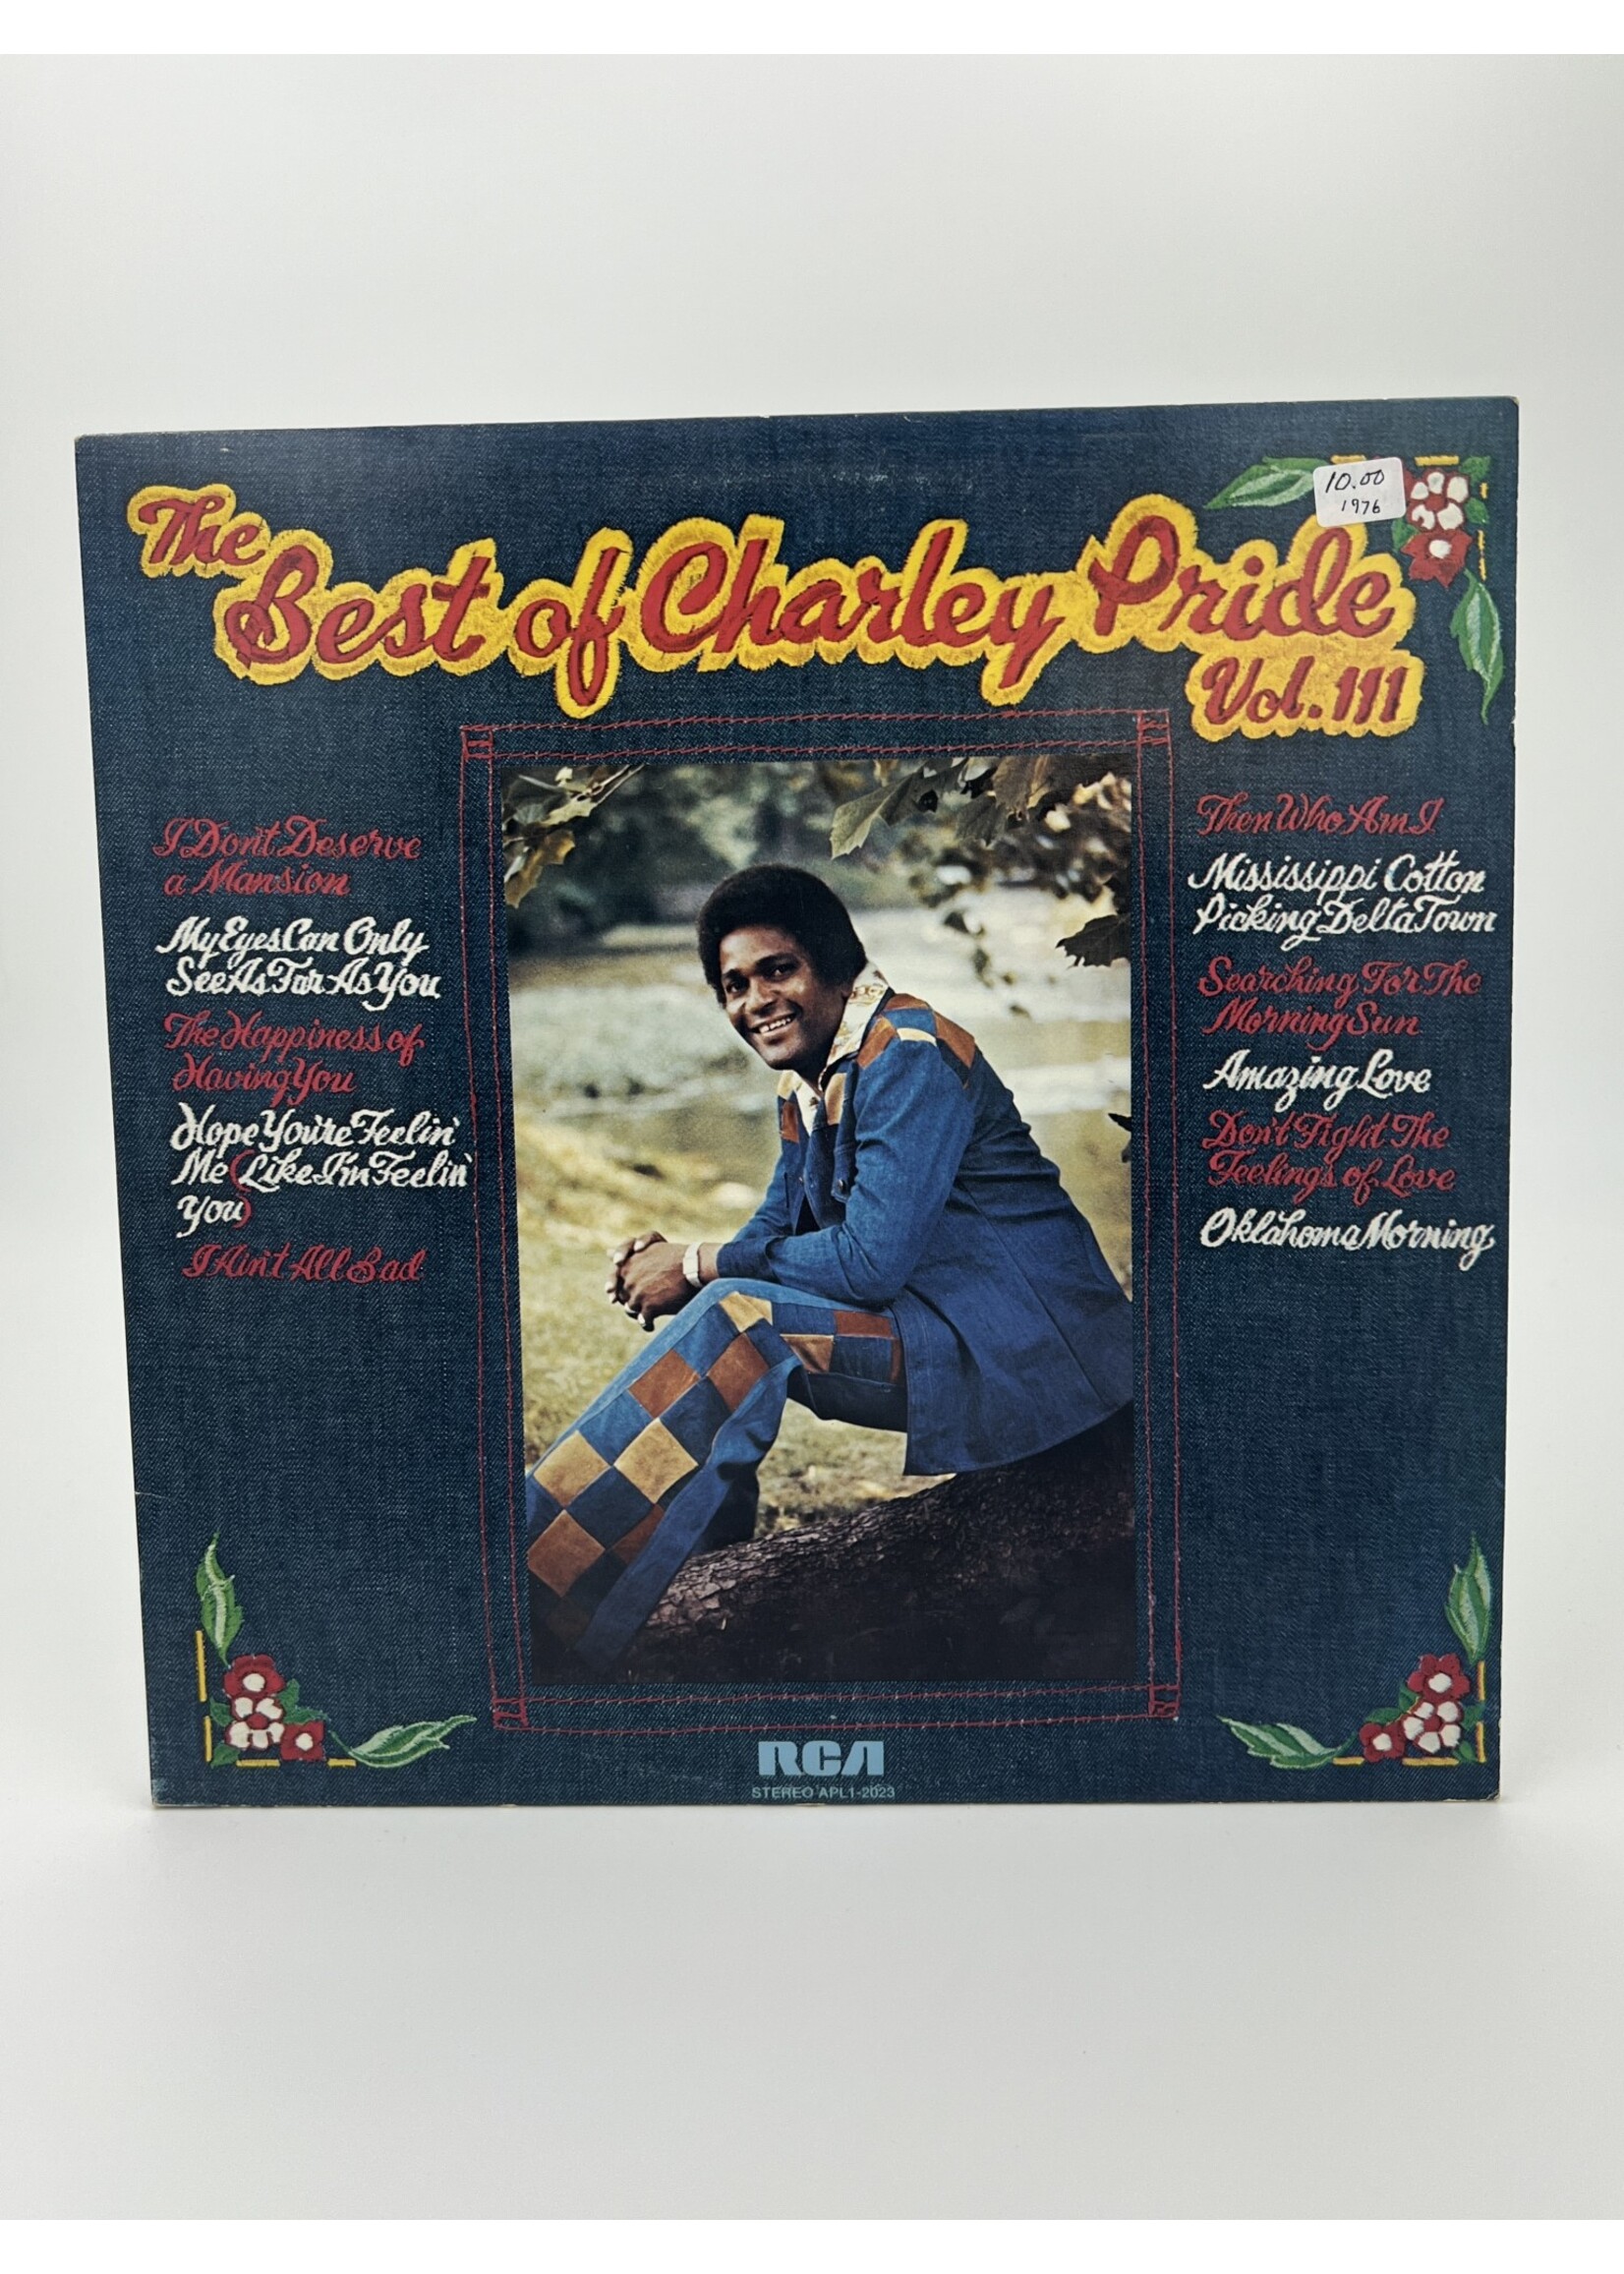 LP   The Best Of Charley Pride Vol 3 LP Record